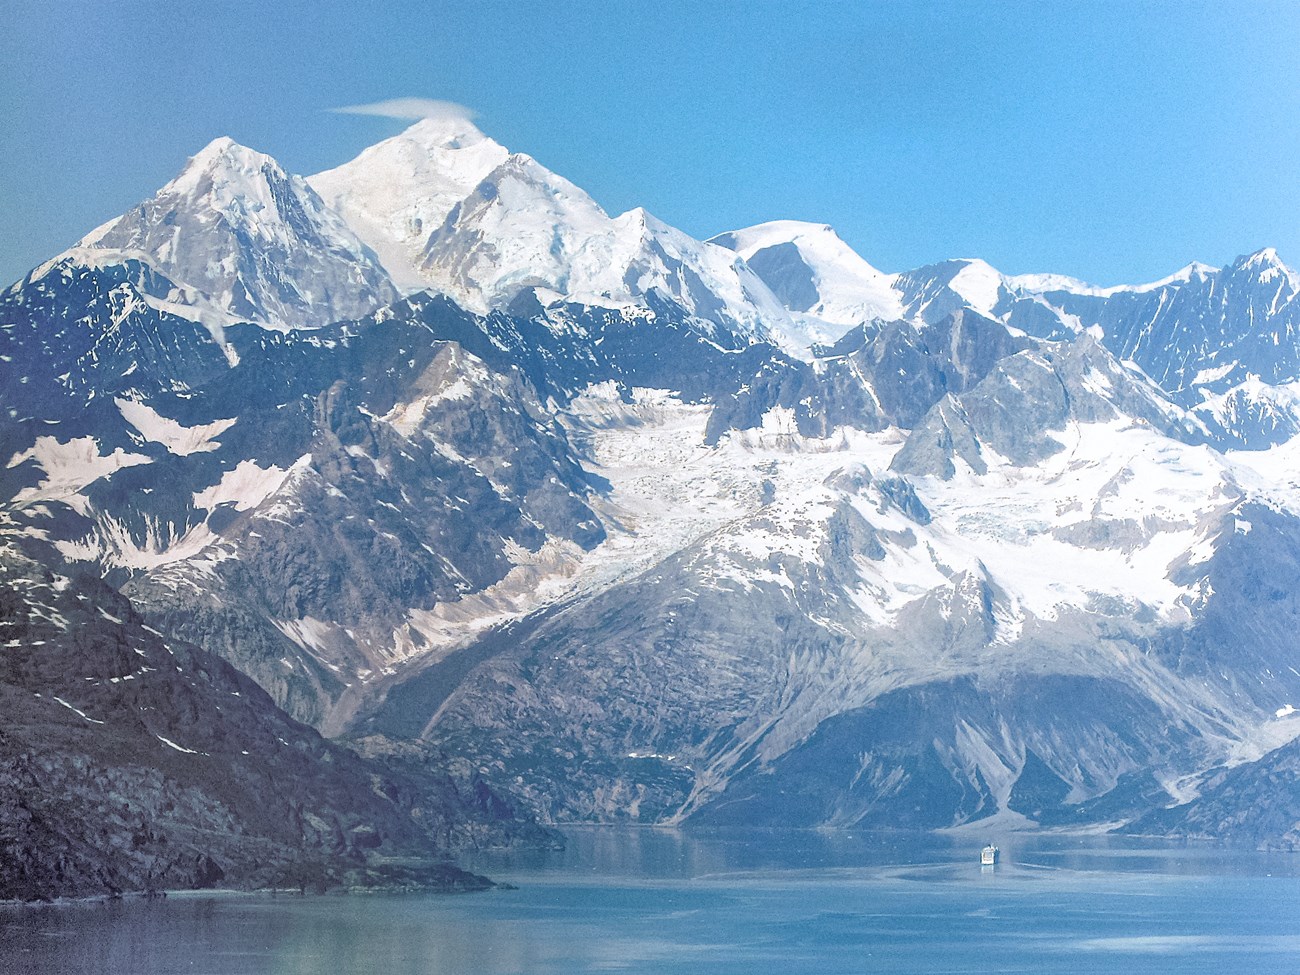 A cruise ship in glacier bay is dwarfed by mount fairweather rising thousands of feet above the ship.